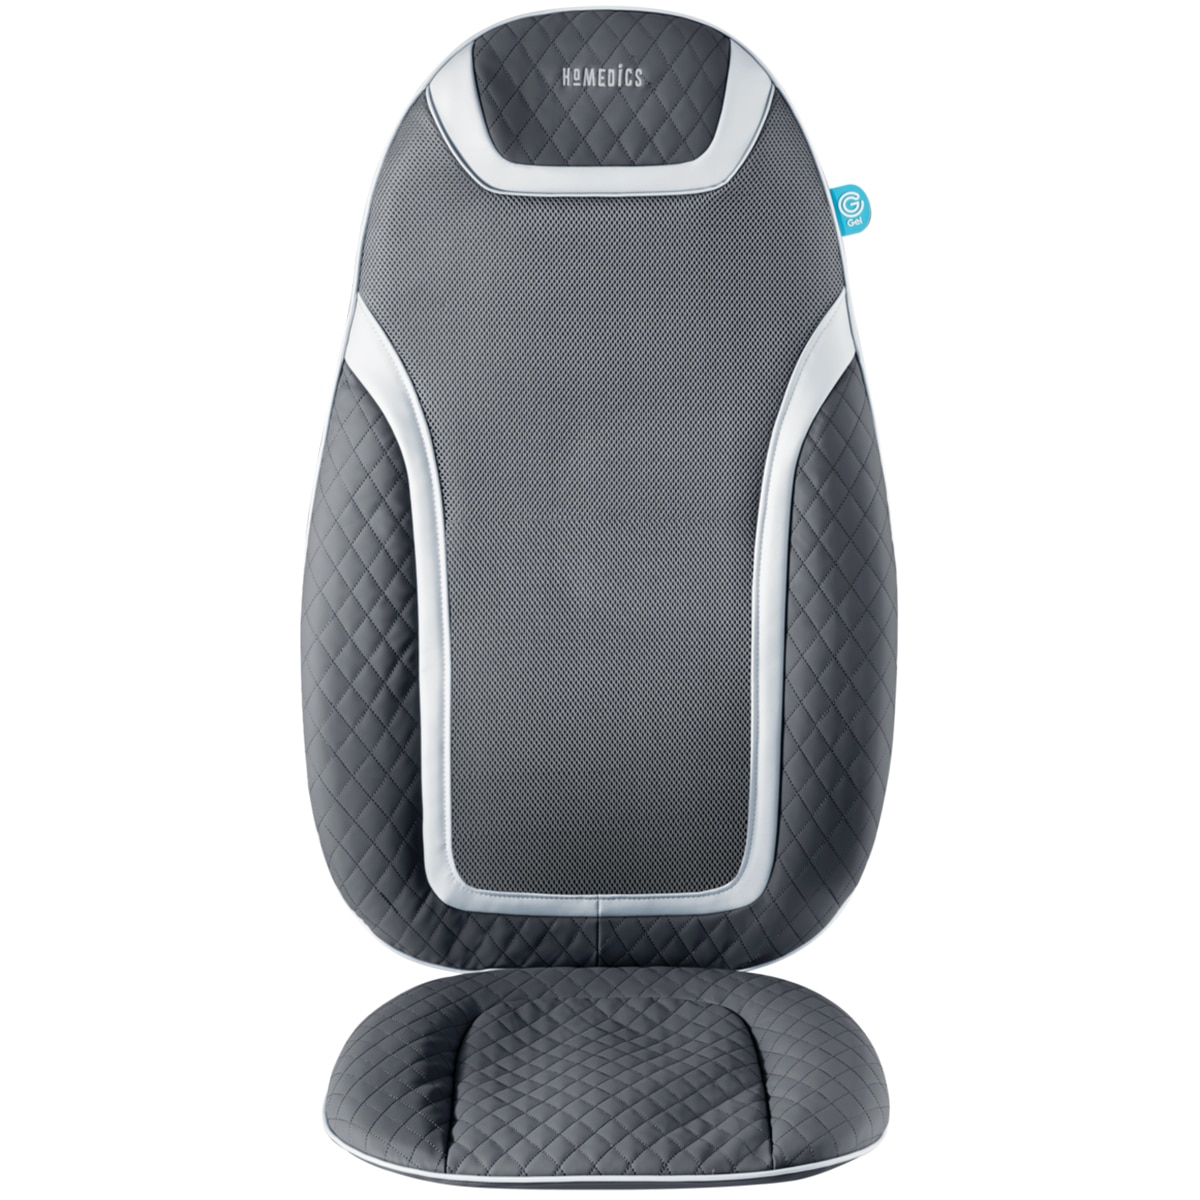 Homedics Gentle Touch Gel Deluxe Massage Cushion with Soothing Heat